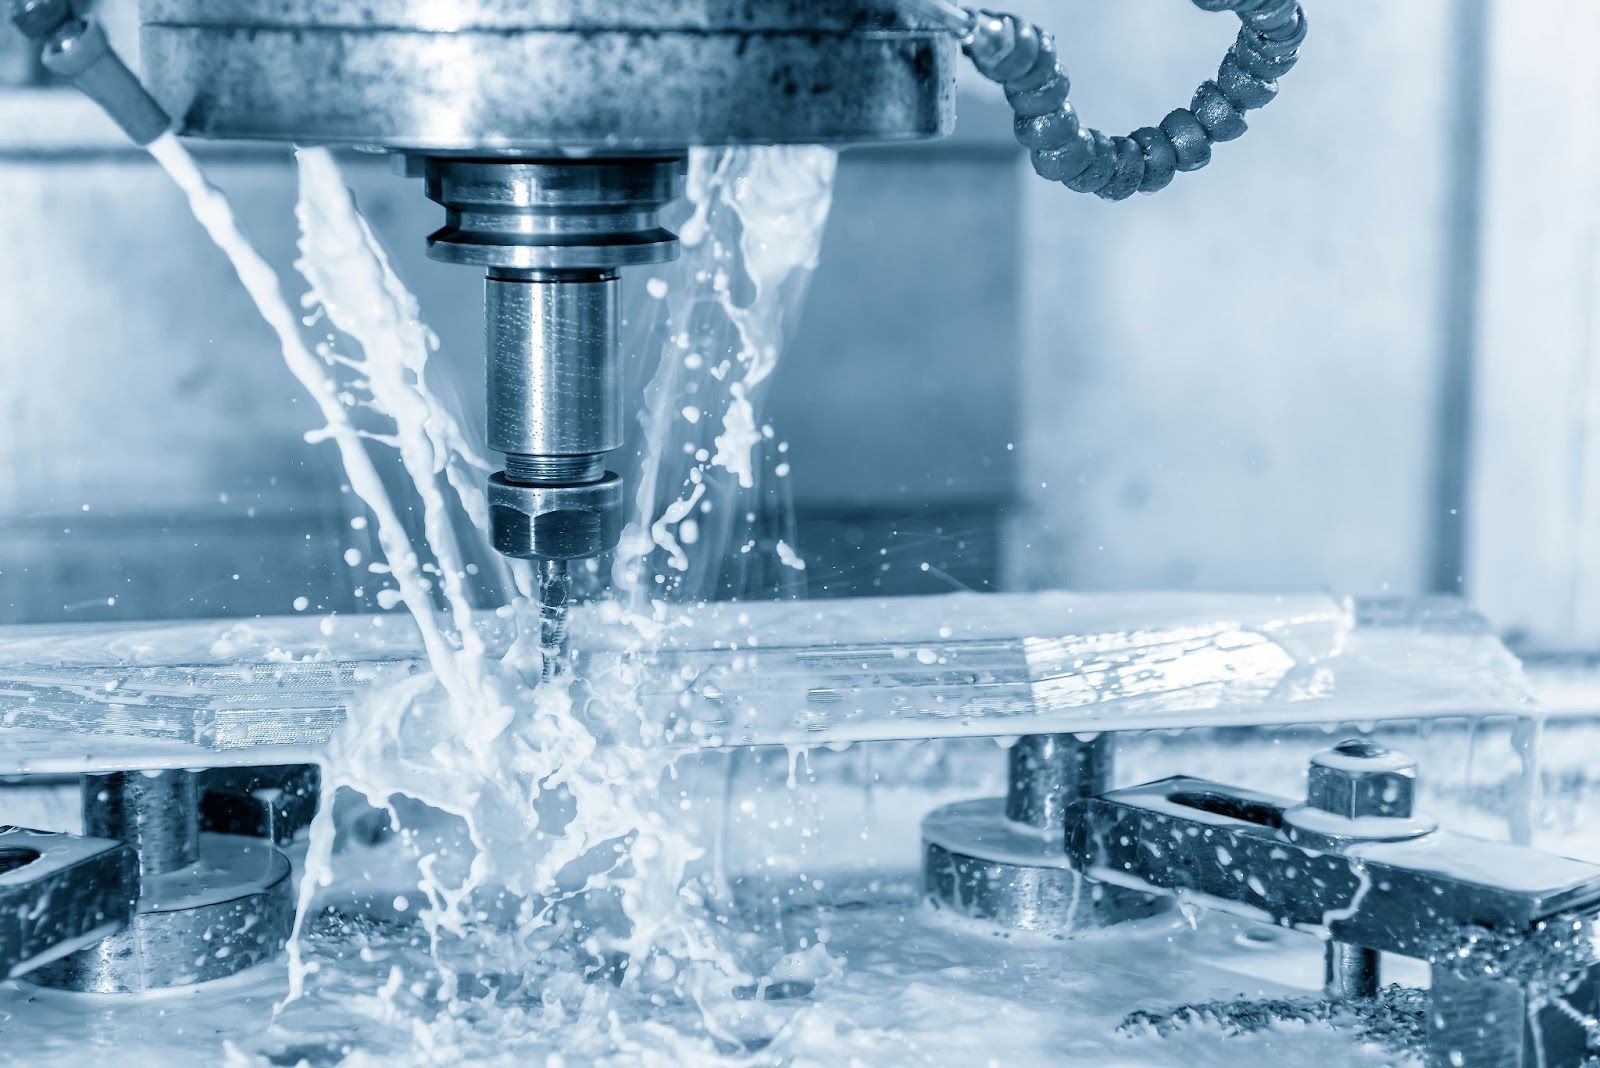 Custom metal fabrication procedures heavily rely on metalworking fluids. Check out the significance of employing high-quality fluids in getting desired results.